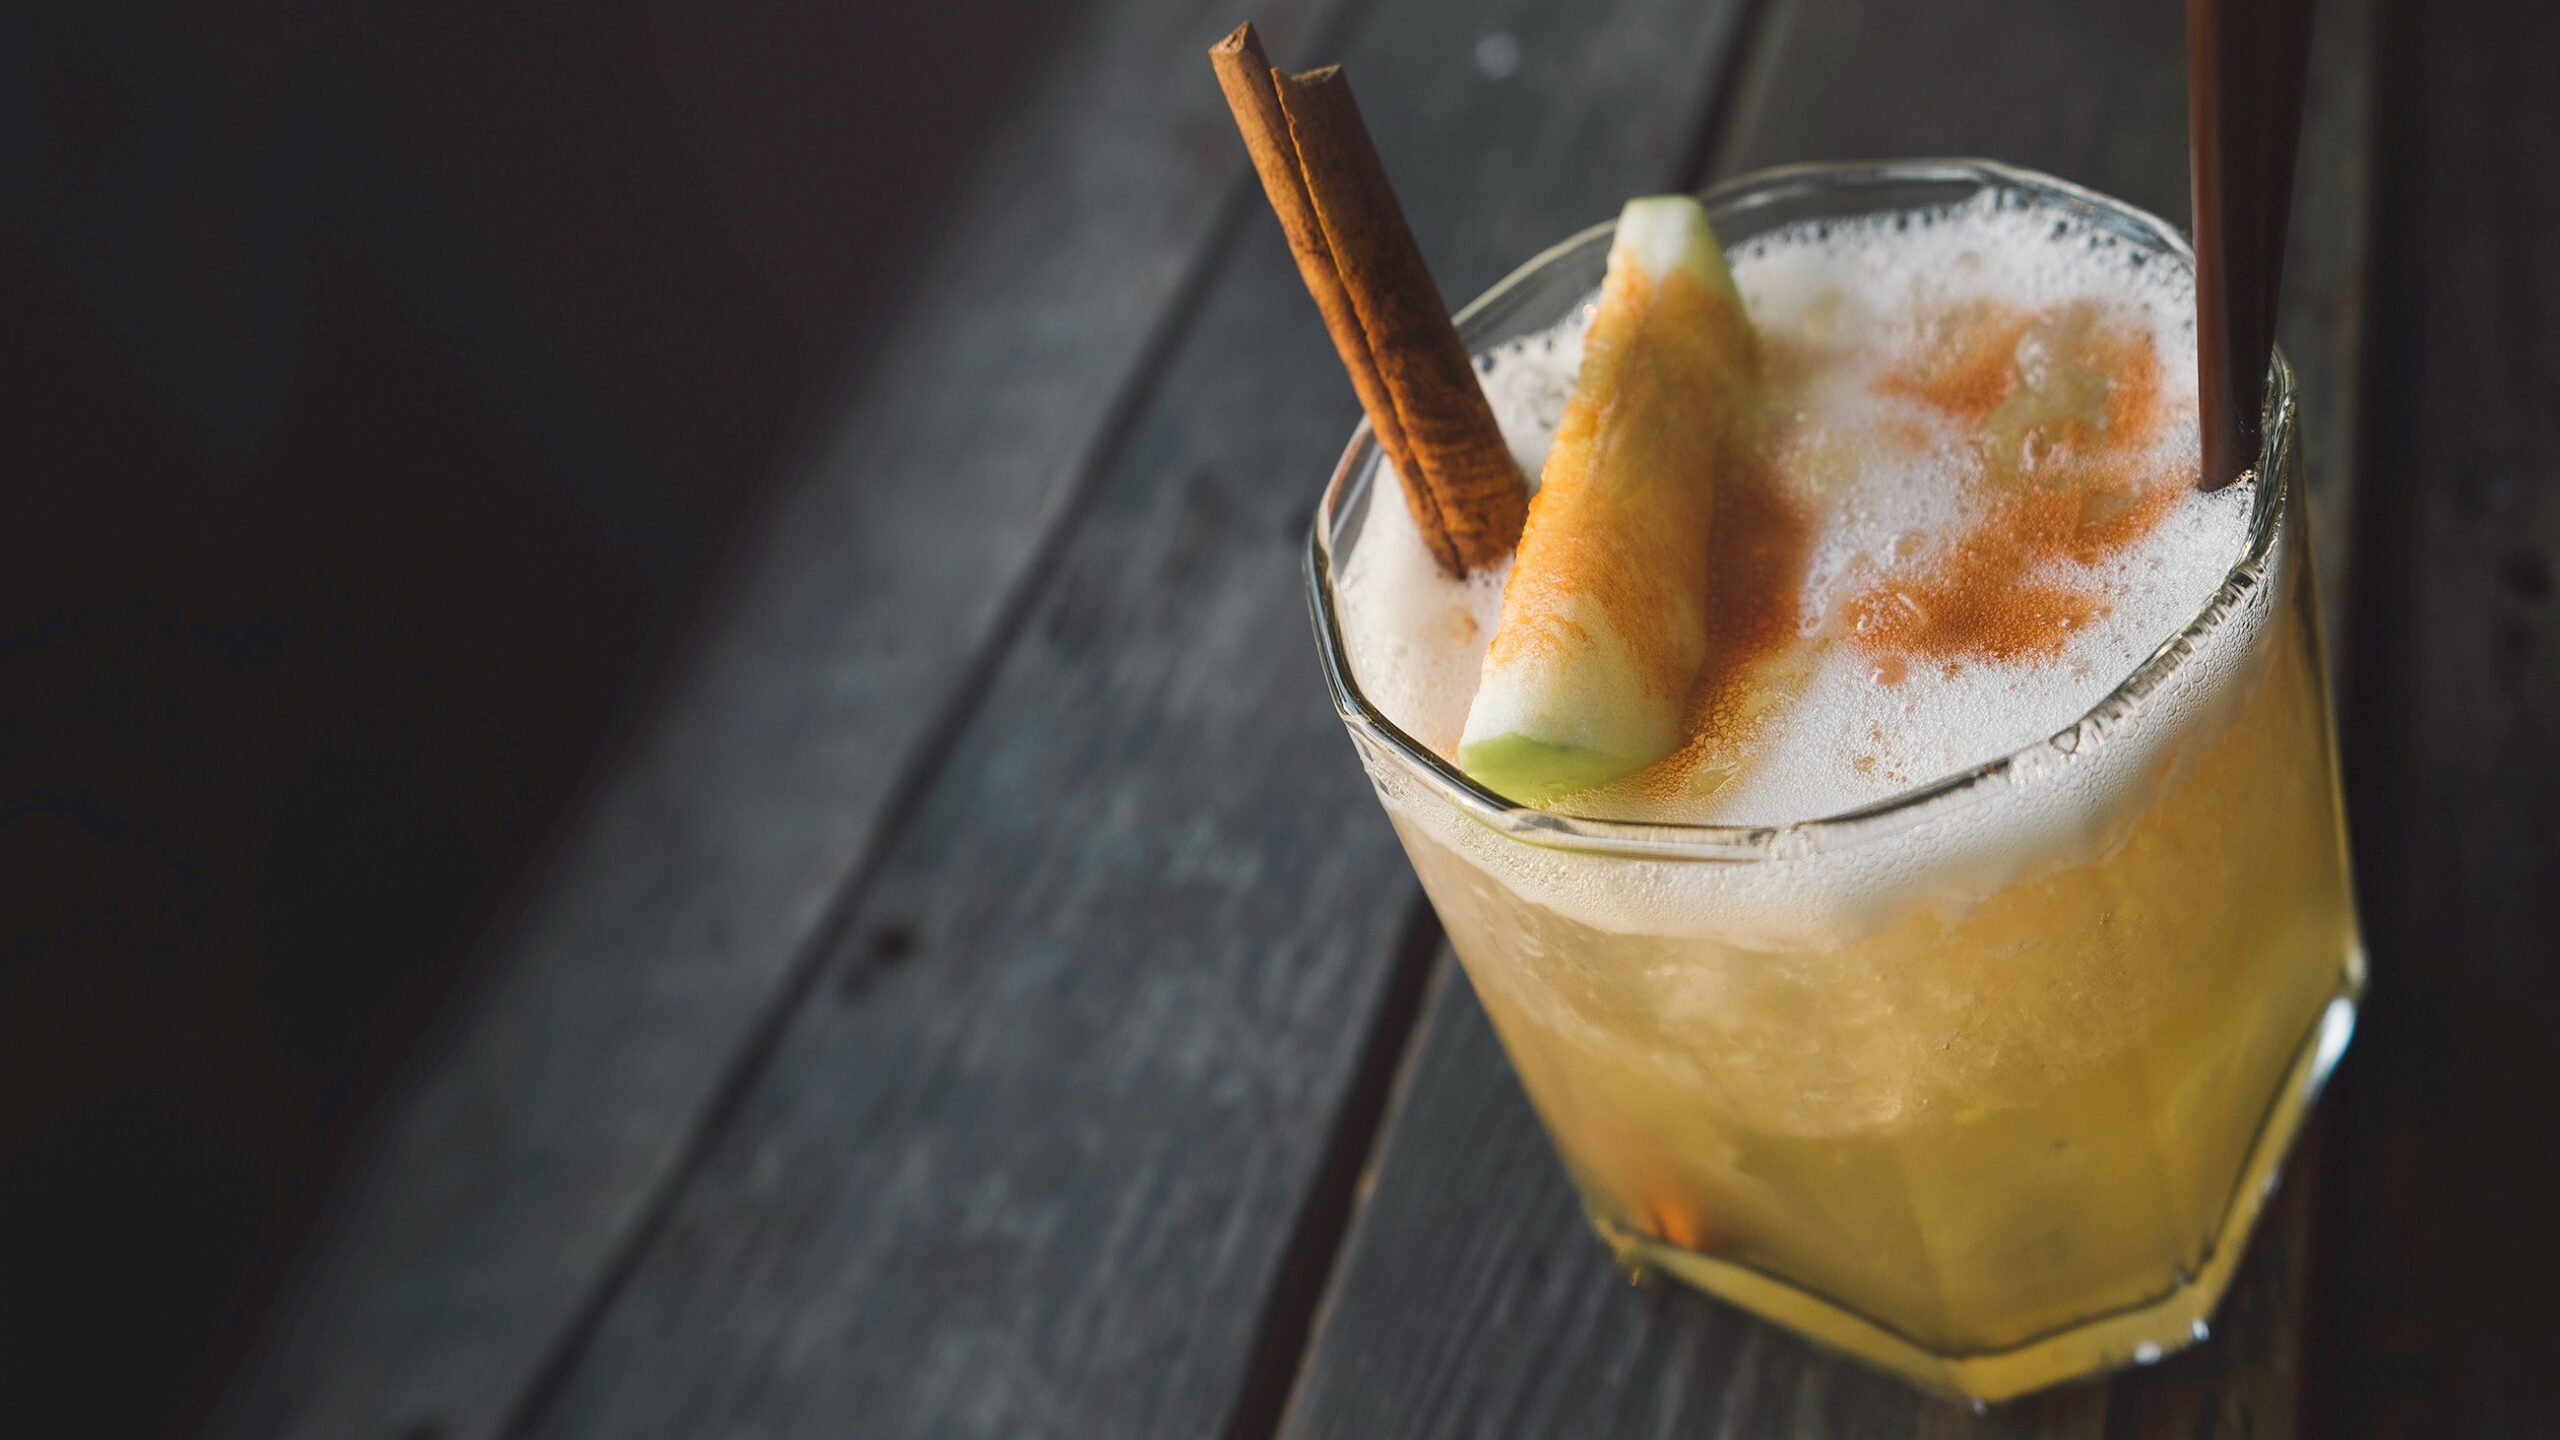 This festive Irish cocktail has the perfect lime and apple flavor. Pictured: an Apple margarita